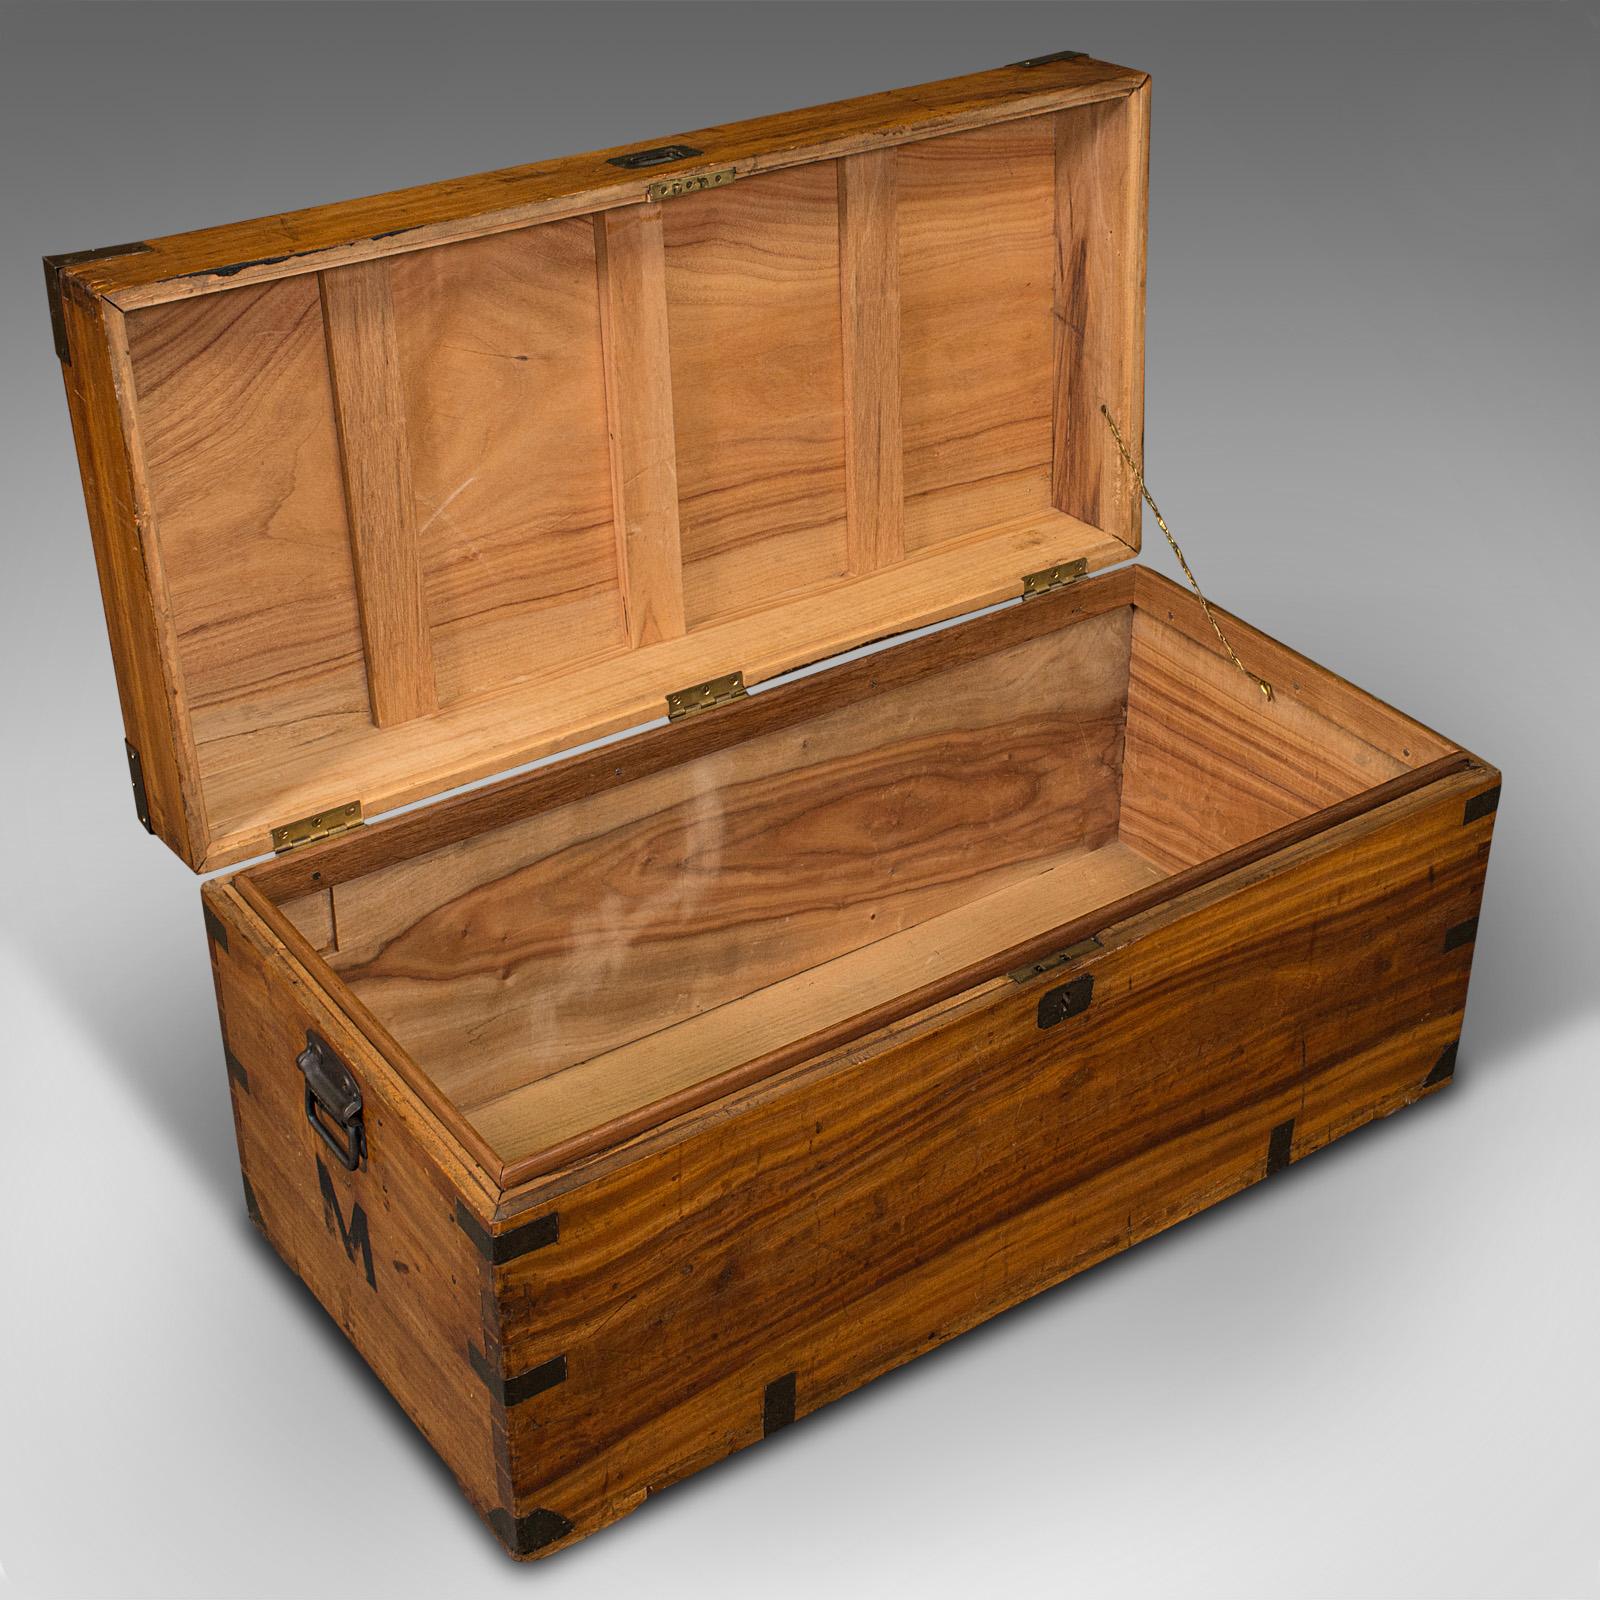 Wood Vintage Campaign Chest, English, Camphorwood, Military Travel Trunk, Circa 1930 For Sale